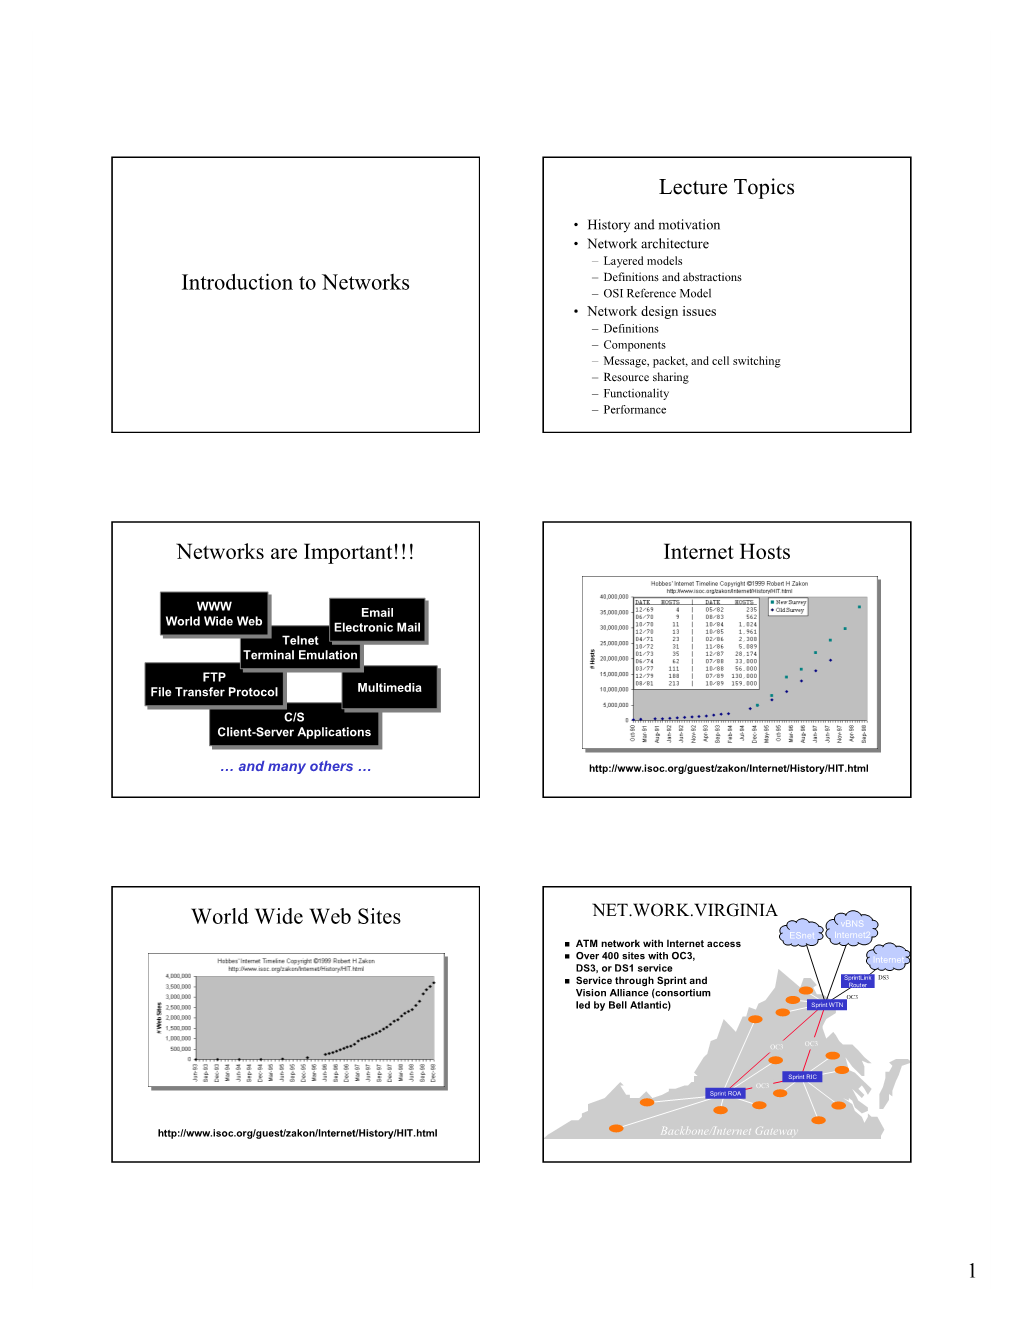 Introduction to Networks Lecture Topics